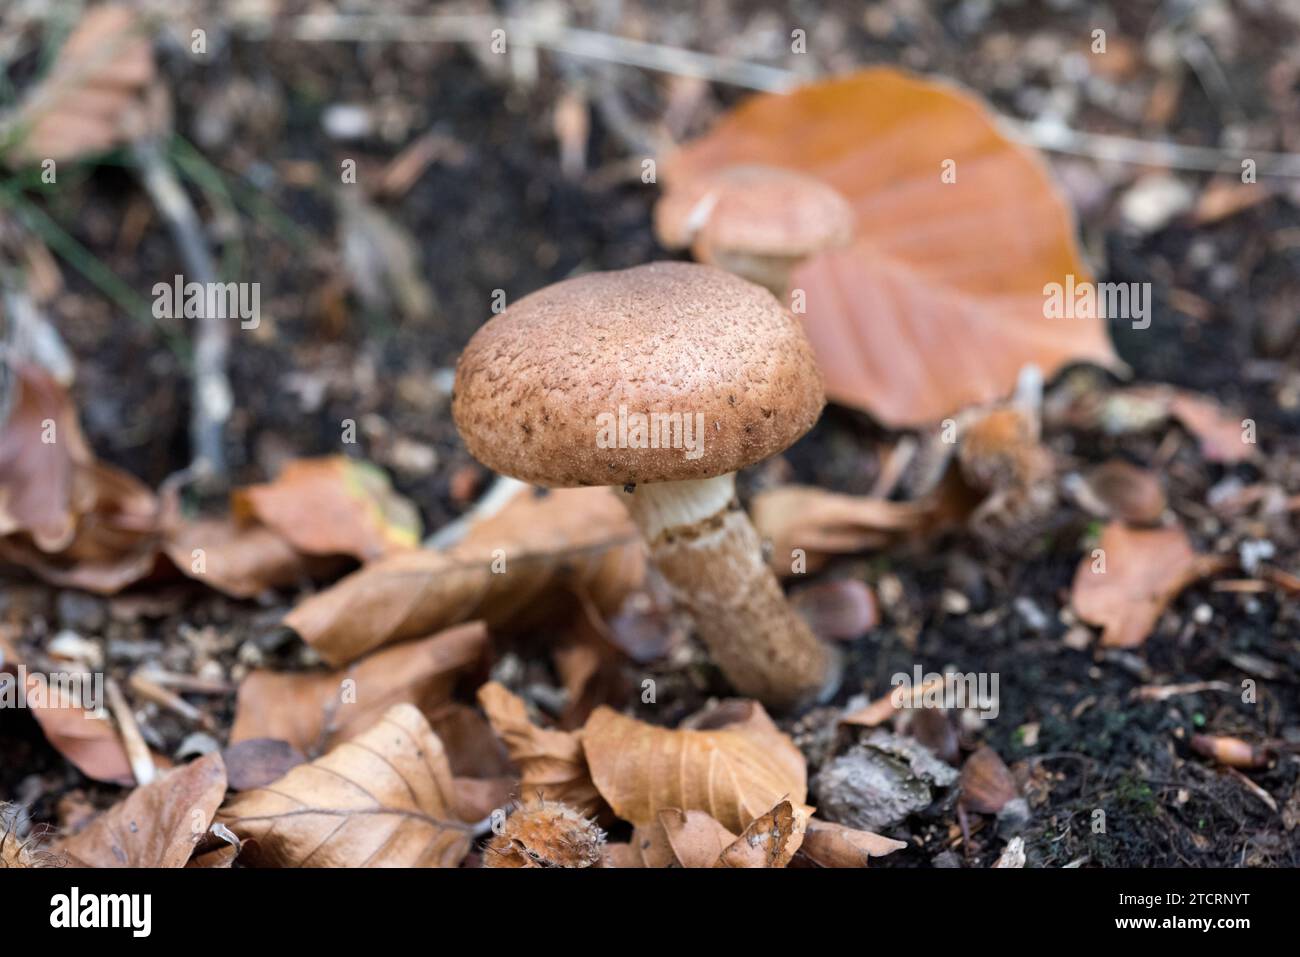 Agaricus silvaticus or Agaricus sylvaticus is an edible mushroom. This photo was taken in Montseny Biosphere Reserve, Barcelona province, Catalonia, S Stock Photo